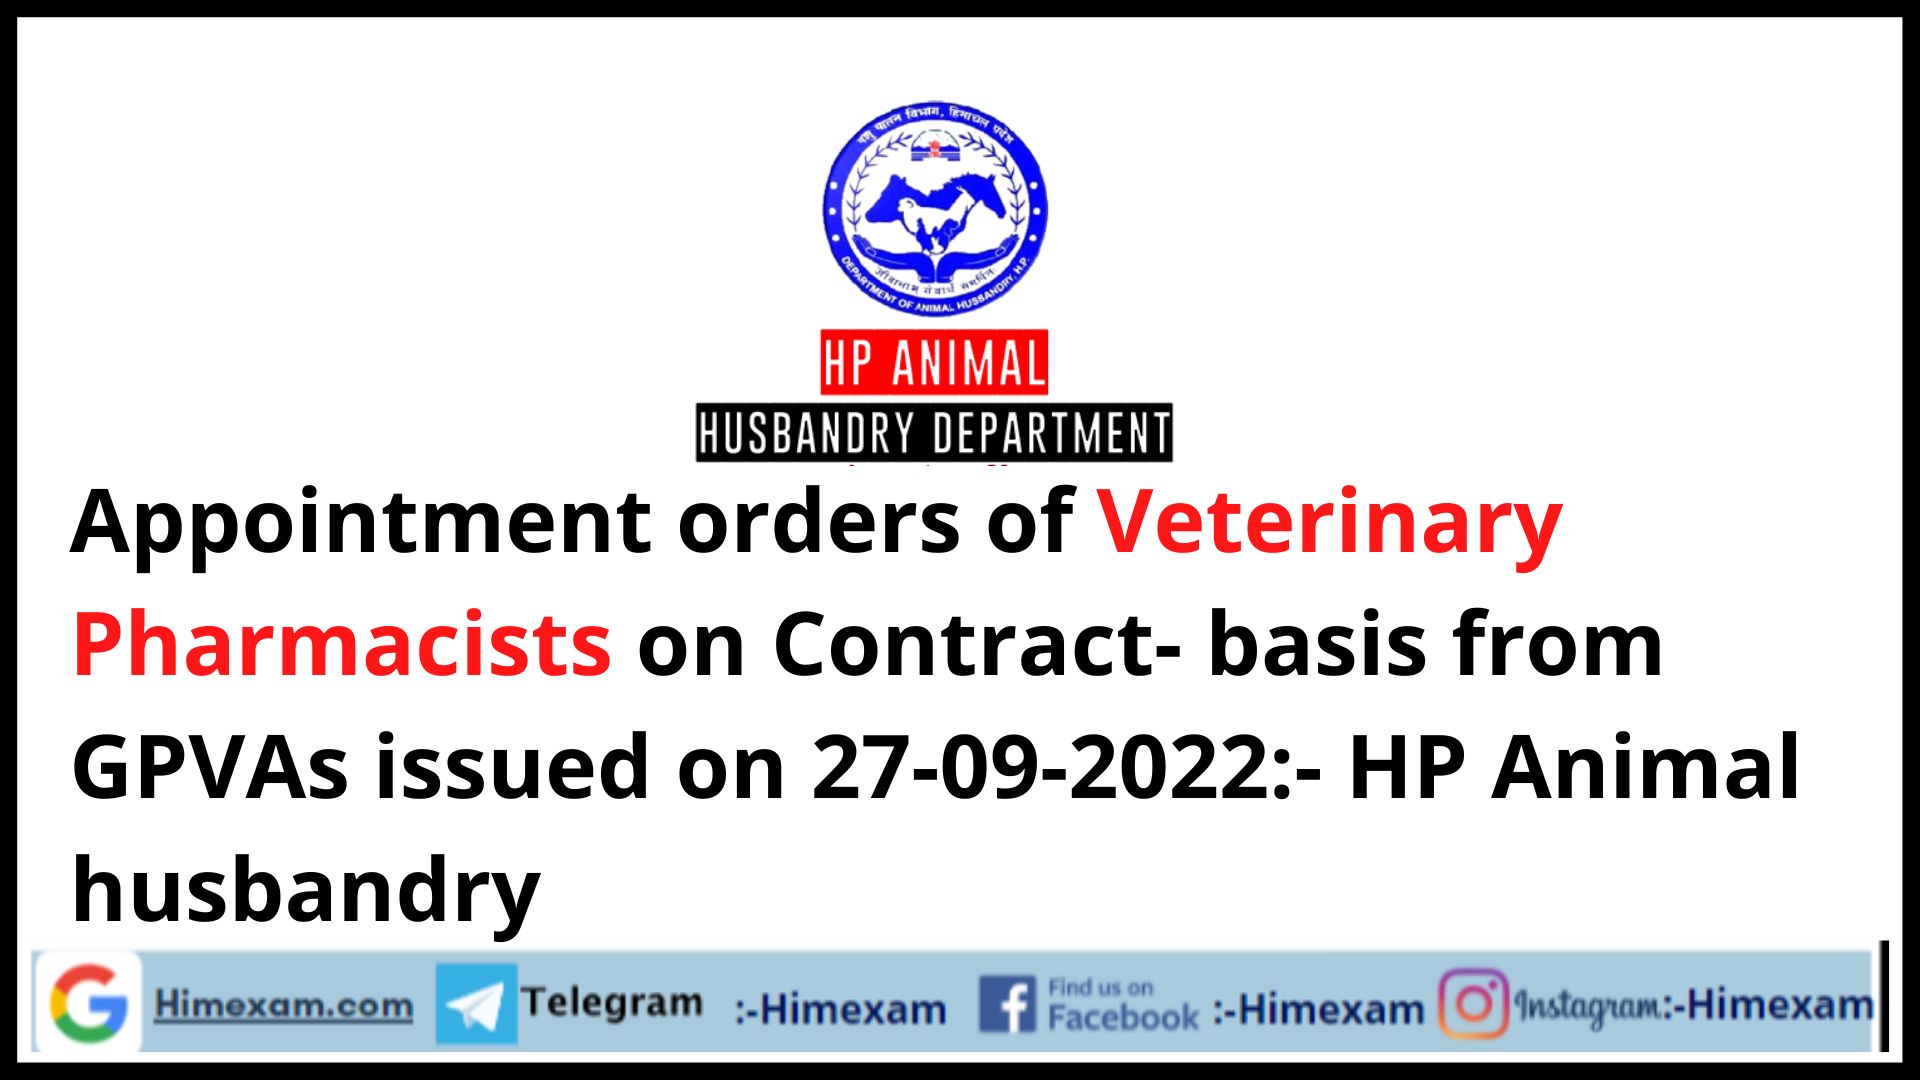 Appointment orders of Veterinary Pharmacists on Contract- basis from GPVAs issued on 27-09-2022:- HP Animal husbandry